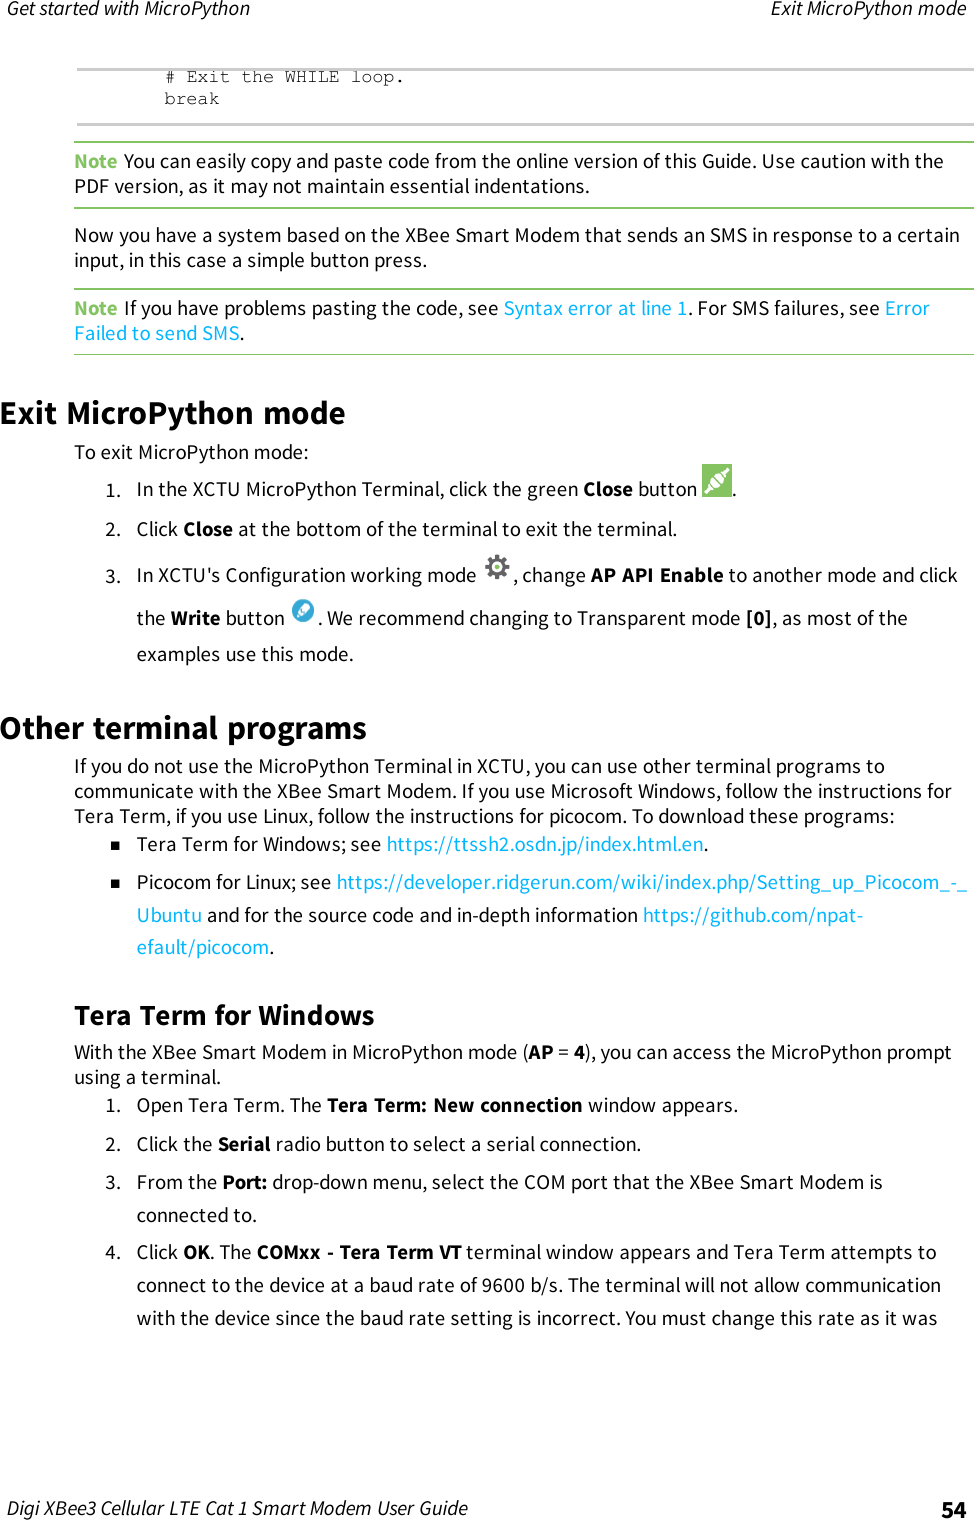 Get started with MicroPython Exit MicroPython modeDigi XBee3 Cellular LTE Cat 1 Smart Modem User Guide 54# Exit the WHILE loop.breakNote You can easily copy and paste code from the online version of this Guide. Use caution with thePDF version, as it may not maintain essential indentations.Now you have a system based on the XBee Smart Modem that sends an SMS in response to a certaininput, in this case a simple button press.Note If you have problems pasting the code, see Syntax error at line 1. For SMS failures, see ErrorFailed to send SMS.Exit MicroPython modeTo exit MicroPython mode:1. In the XCTU MicroPython Terminal, click the green Close button .2. Click Close at the bottom of the terminal to exit the terminal.3. In XCTU&apos;s Configuration working mode , change AP API Enable to another mode and clickthe Write button . We recommend changing to Transparent mode [0], as most of theexamples use this mode.Other terminal programsIf you do not use the MicroPython Terminal in XCTU, you can use other terminal programs tocommunicate with the XBee Smart Modem. If you use Microsoft Windows, follow the instructions forTera Term, if you use Linux, follow the instructions for picocom. To download these programs:nTera Term for Windows; see https://ttssh2.osdn.jp/index.html.en.nPicocom for Linux; see https://developer.ridgerun.com/wiki/index.php/Setting_up_Picocom_-_Ubuntu and for the source code and in-depth information https://github.com/npat-efault/picocom.Tera Term for WindowsWith the XBee Smart Modem in MicroPython mode (AP =4), you can access the MicroPython promptusing a terminal.1. Open Tera Term. The Tera Term: New connection window appears.2. Click the Serial radio button to select a serial connection.3. From the Port: drop-down menu, select the COM port that the XBee Smart Modem isconnected to.4. Click OK. The COMxx - Tera Term VT terminal window appears and Tera Term attempts toconnect to the device at a baud rate of 9600 b/s. The terminal will not allow communicationwith the device since the baud rate setting is incorrect. You must change this rate as it was